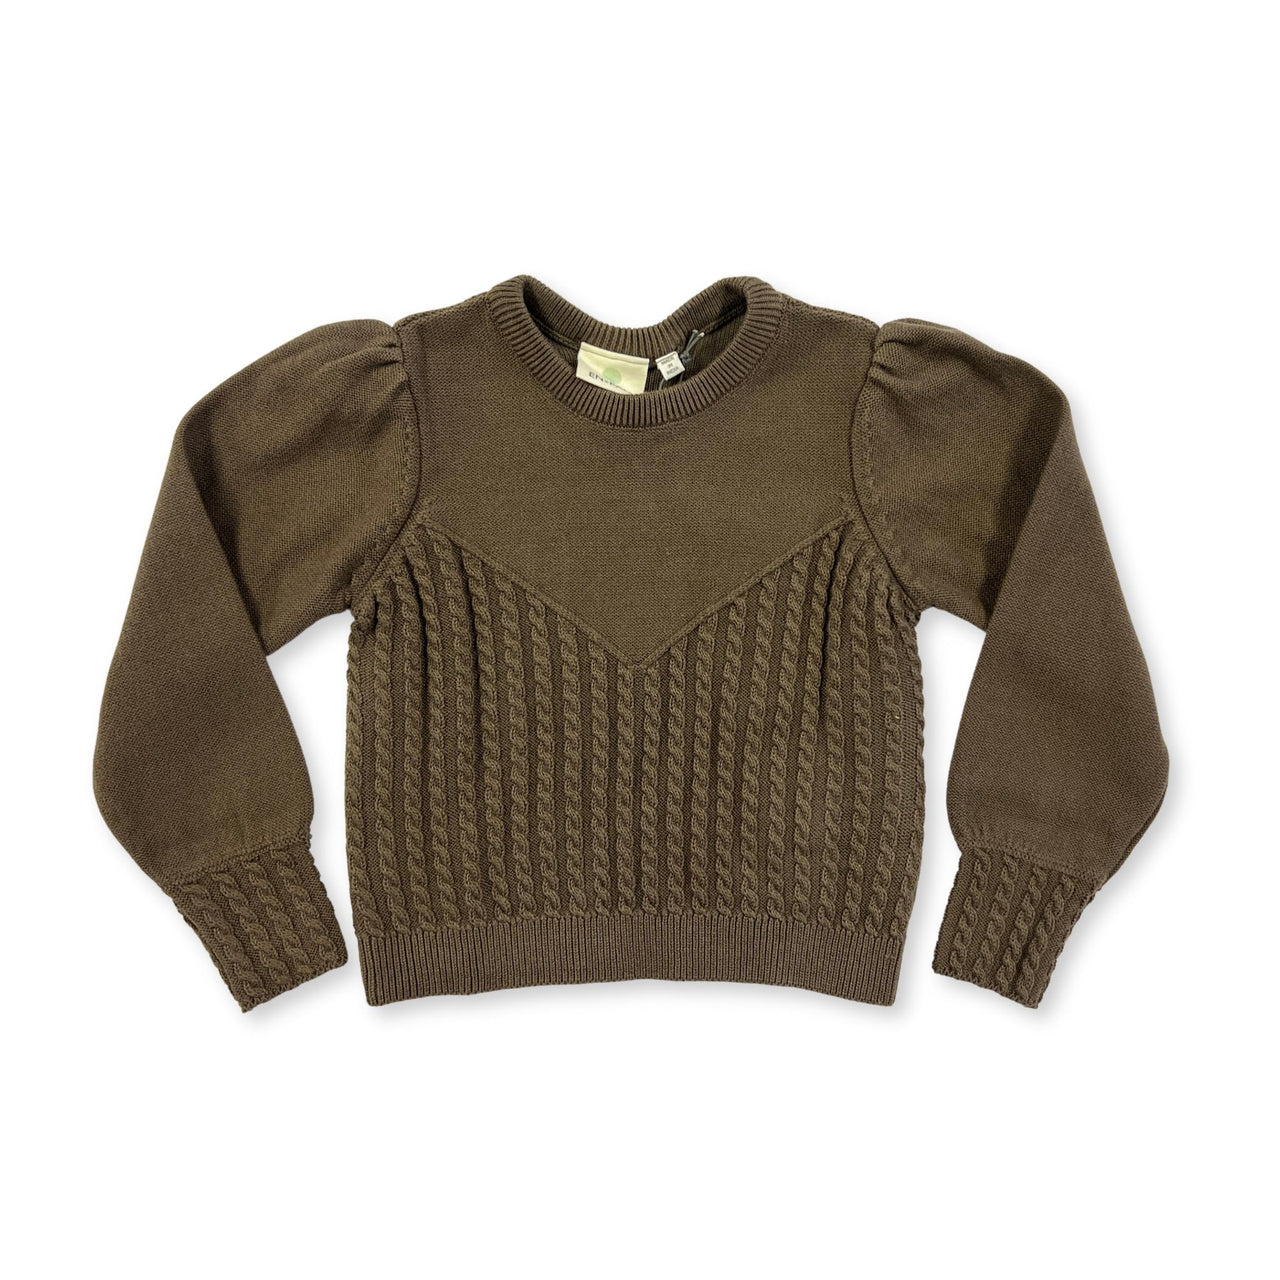 Chocolate Chip Knit Pullover